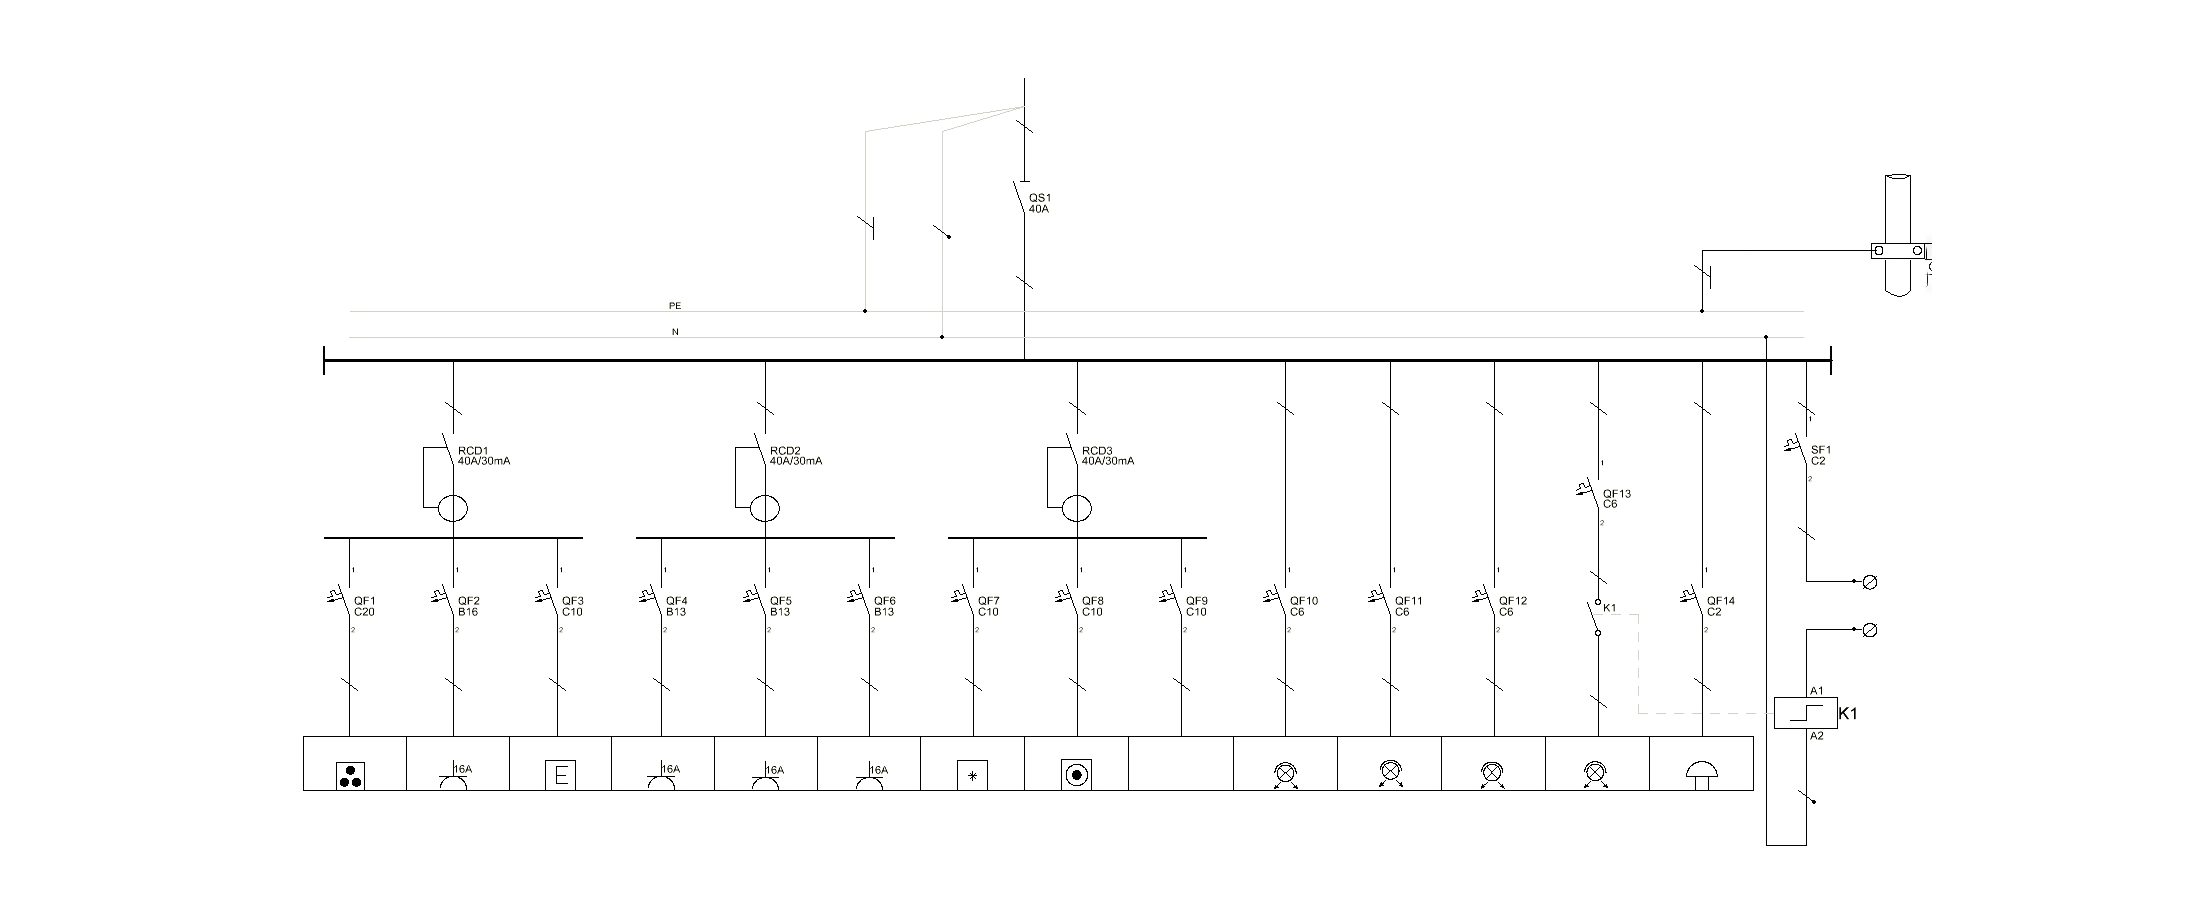 SINGLE-LINE DIAGRAM HOW TO REPRESENT THE ELECTRICAL INSTALLATION OF A HOUSE  - STACBOND Plenum Low Voltage Conduit STACBOND